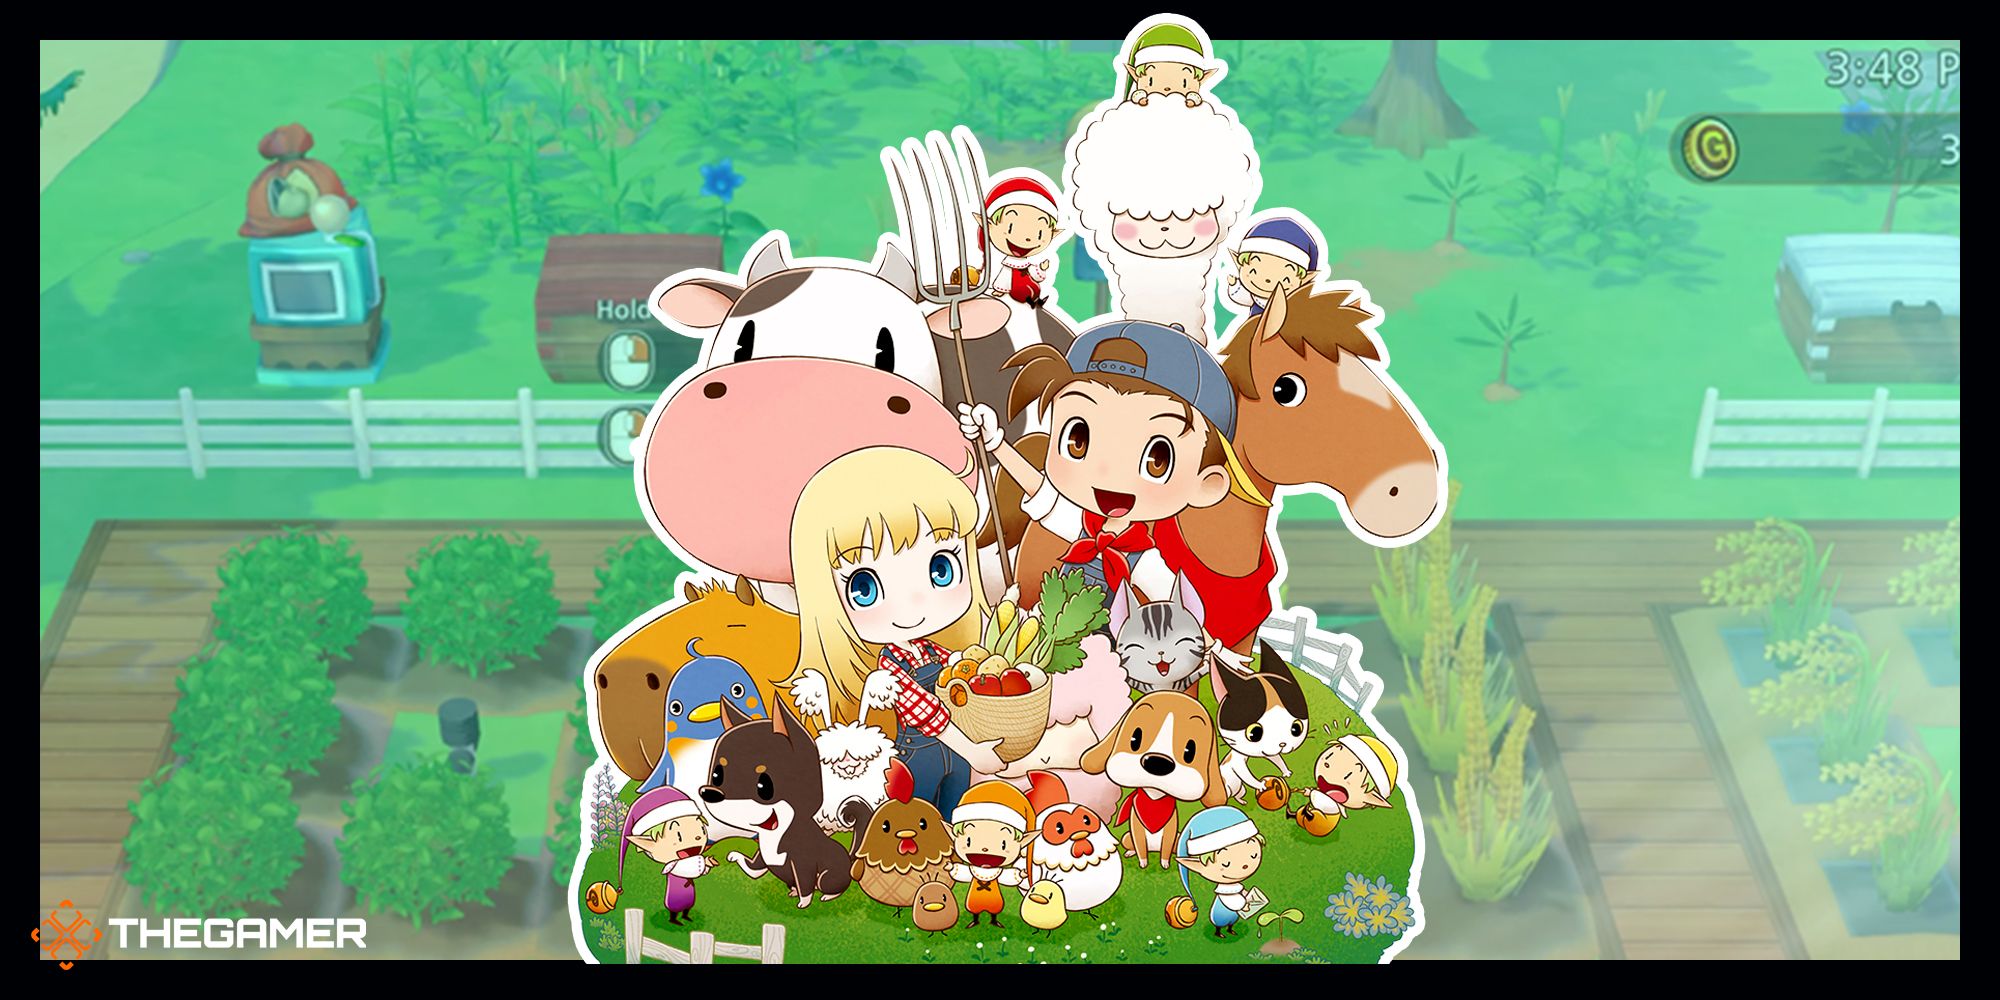 Image and art from Story of Seasons Friends of Mineral Town.